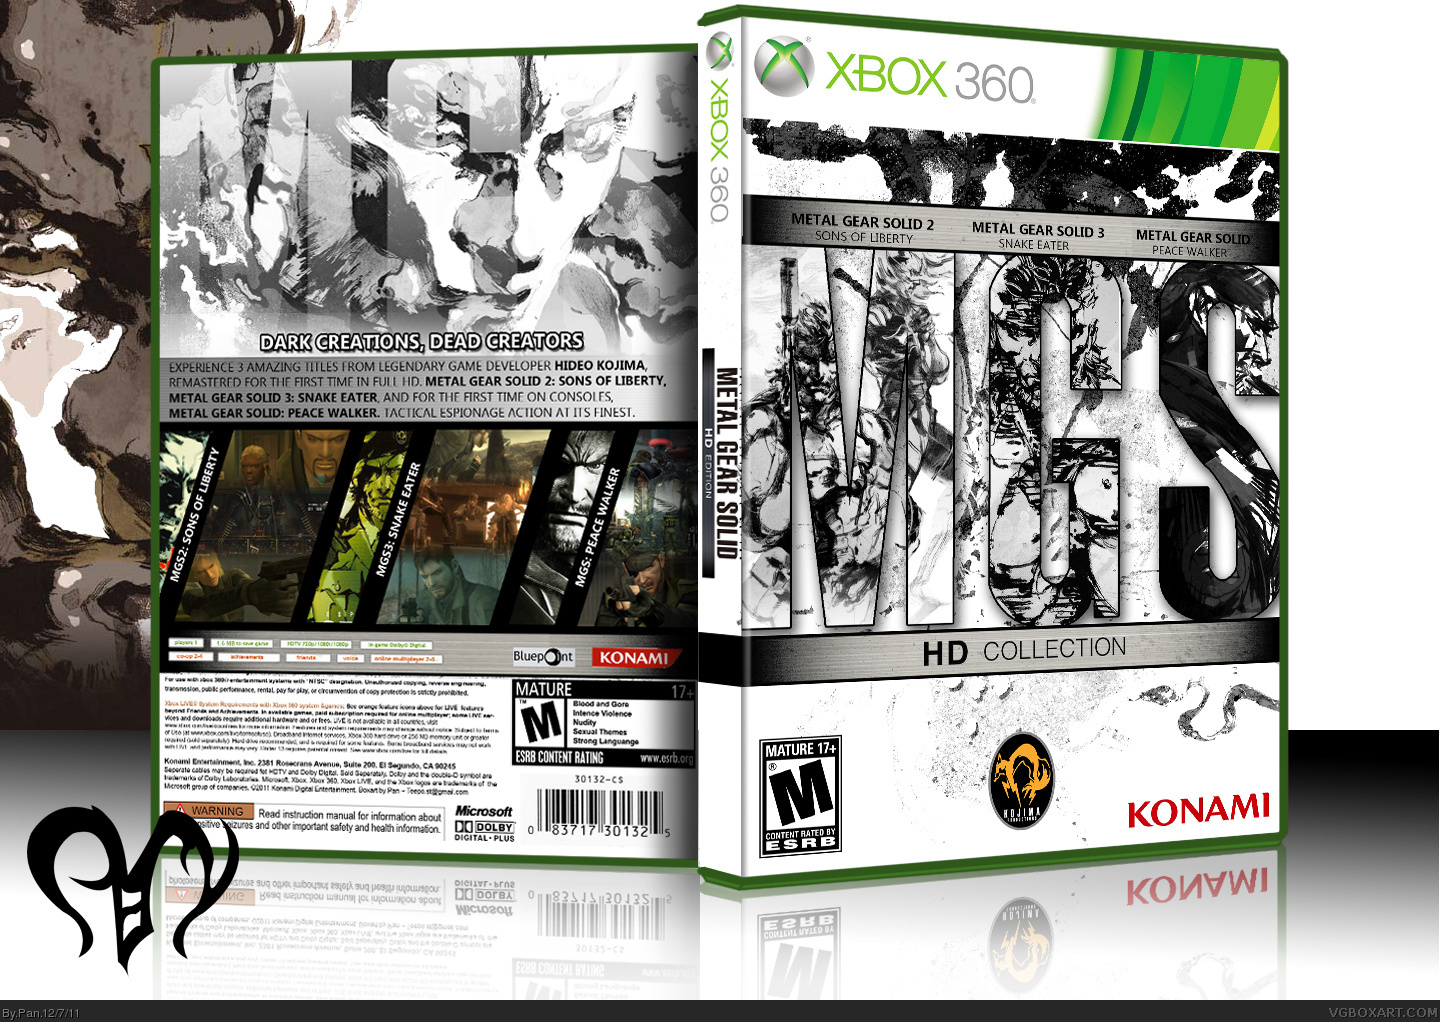 Metal Gear Solid: HD Collection box cover